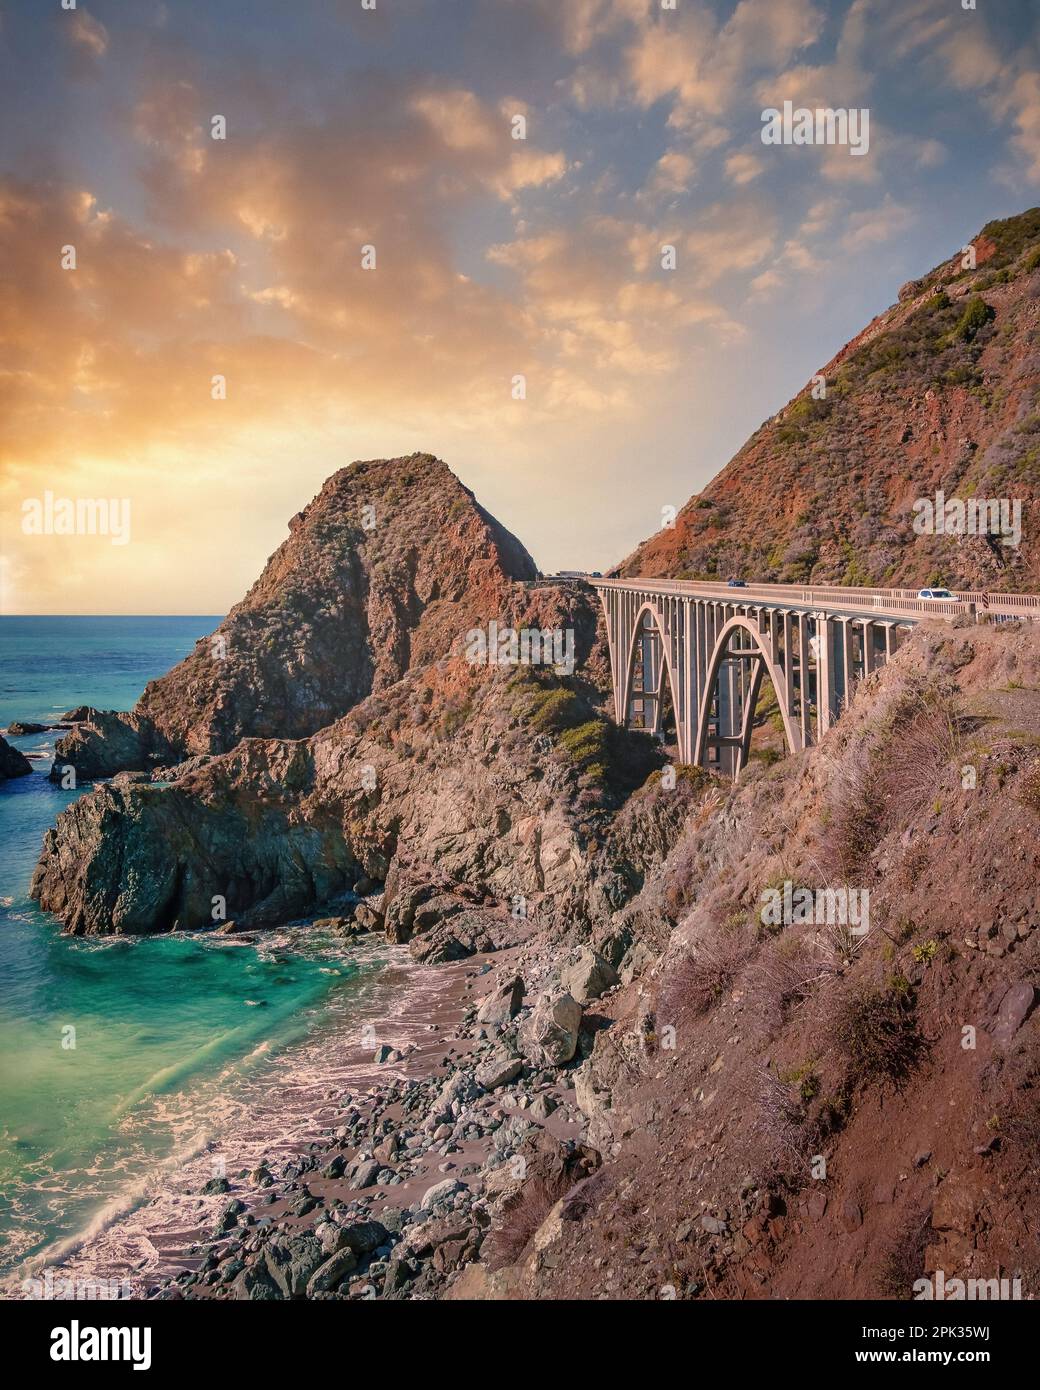 Big Creek Bridge on the Pacific Coast Highway in Big Sur, California. Viewed from Vista Point. Stock Photo